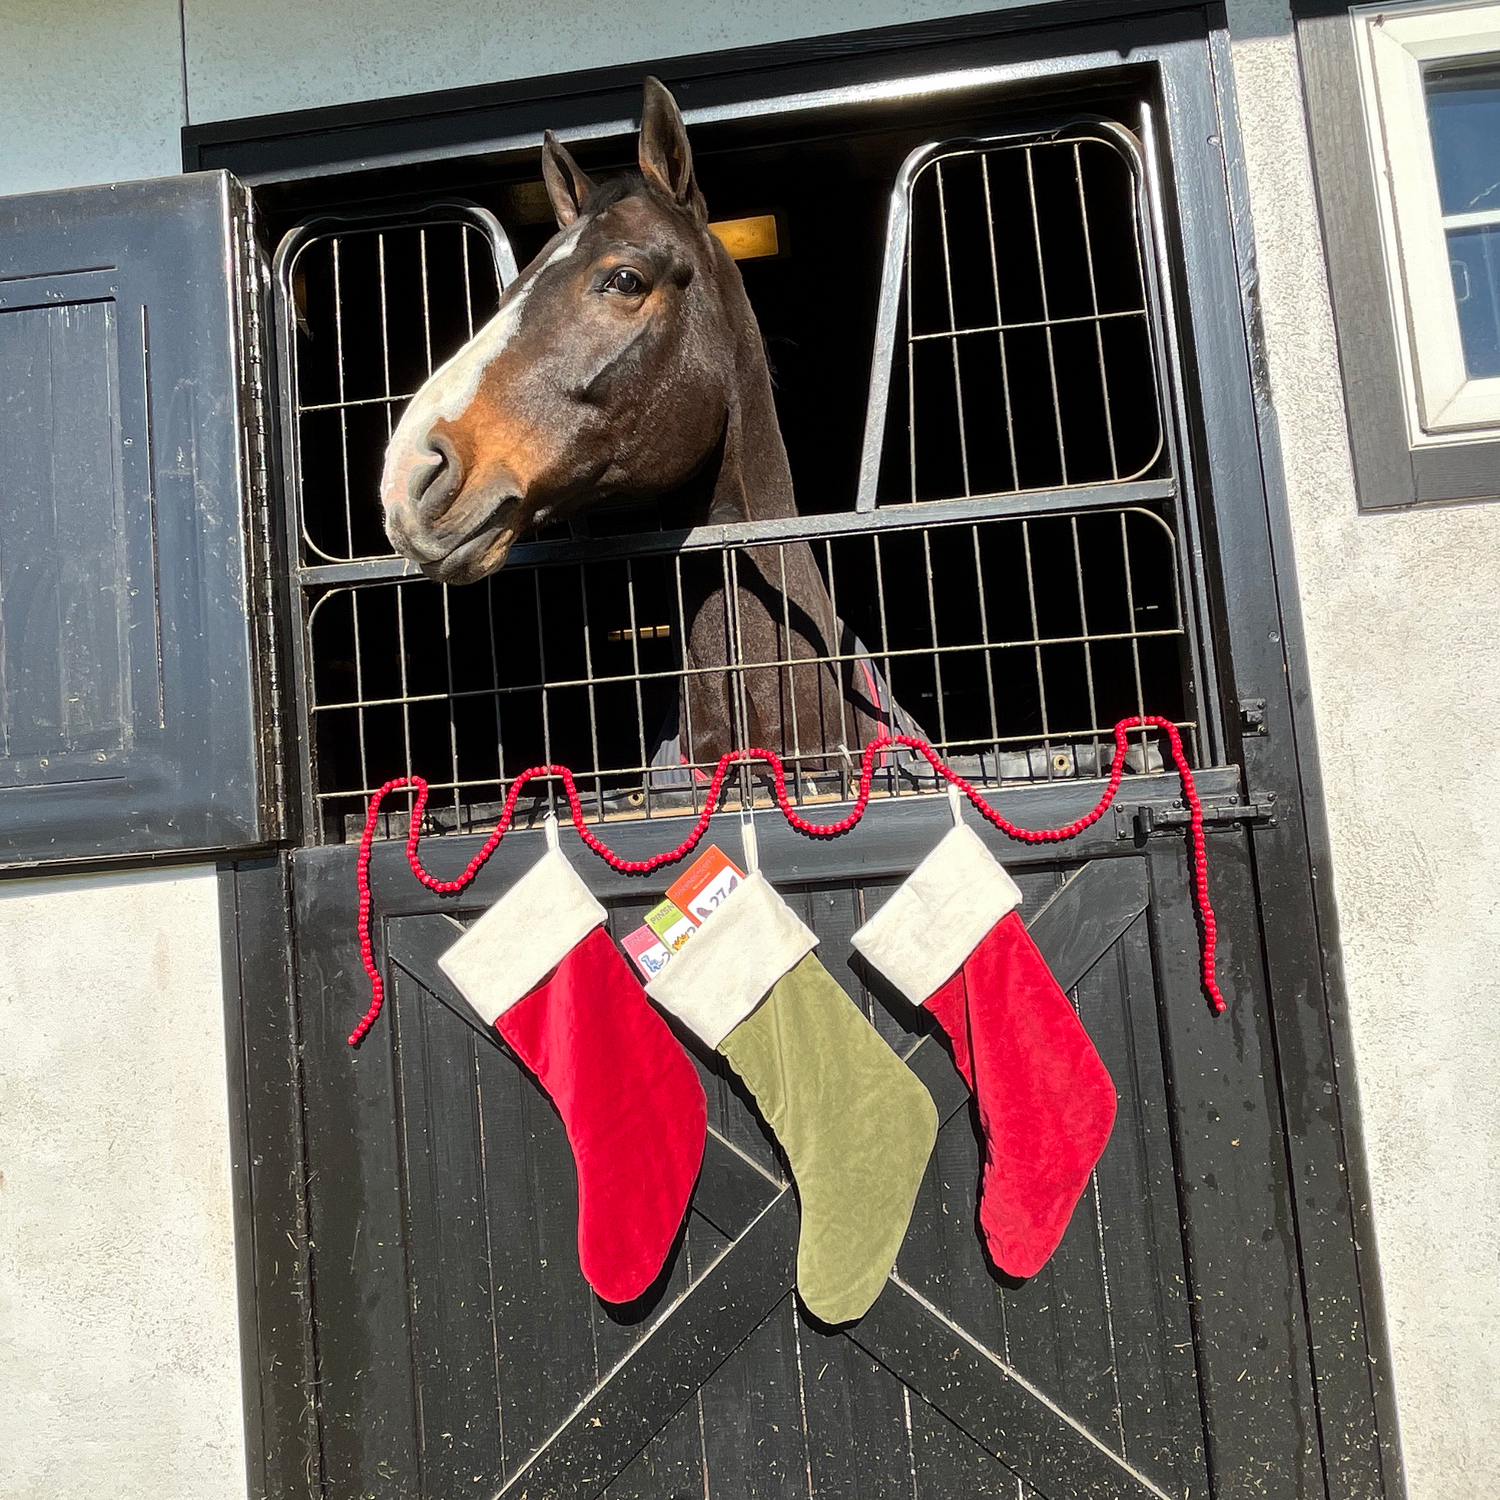 Pinsnickety horse show number pins in a christmas stocking hanging from a horse's stall